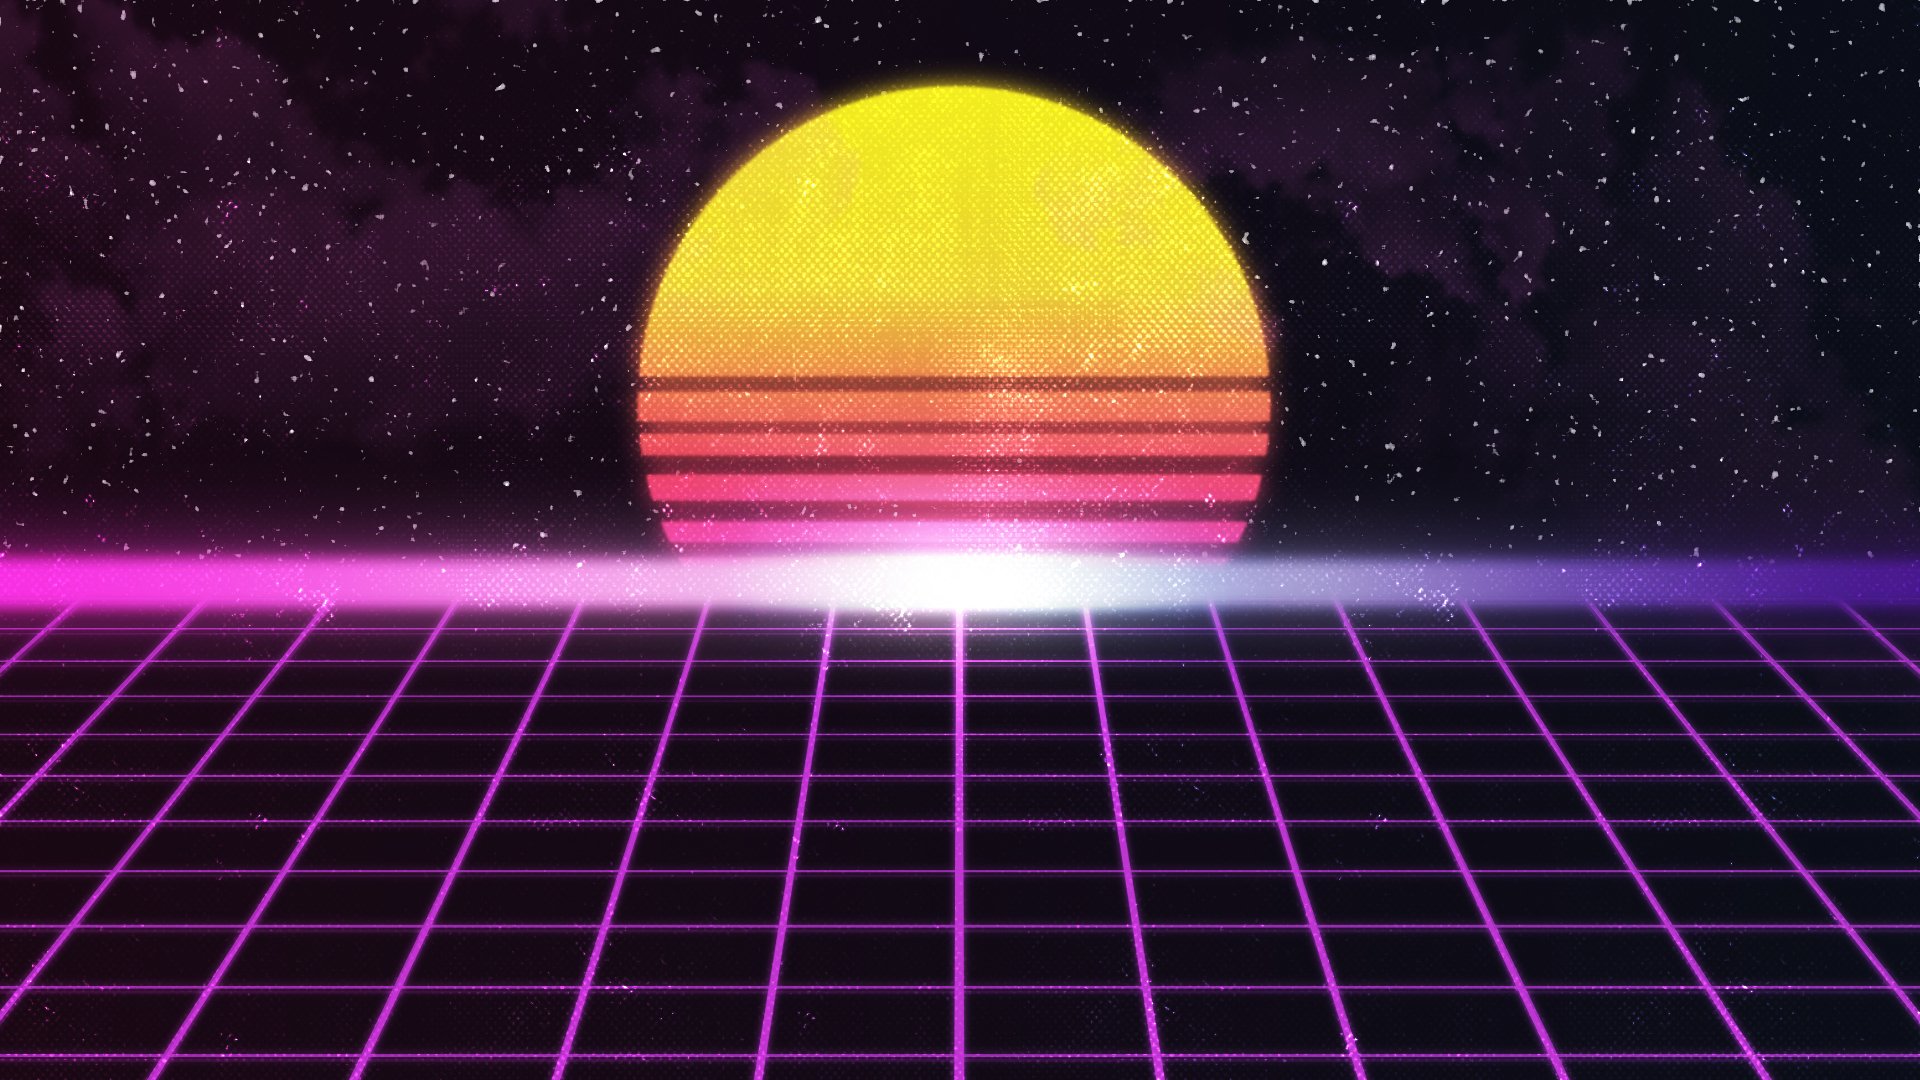 New Retro Wave, Retro style, Artwork Wallpapers HD / Desktop and Mobile